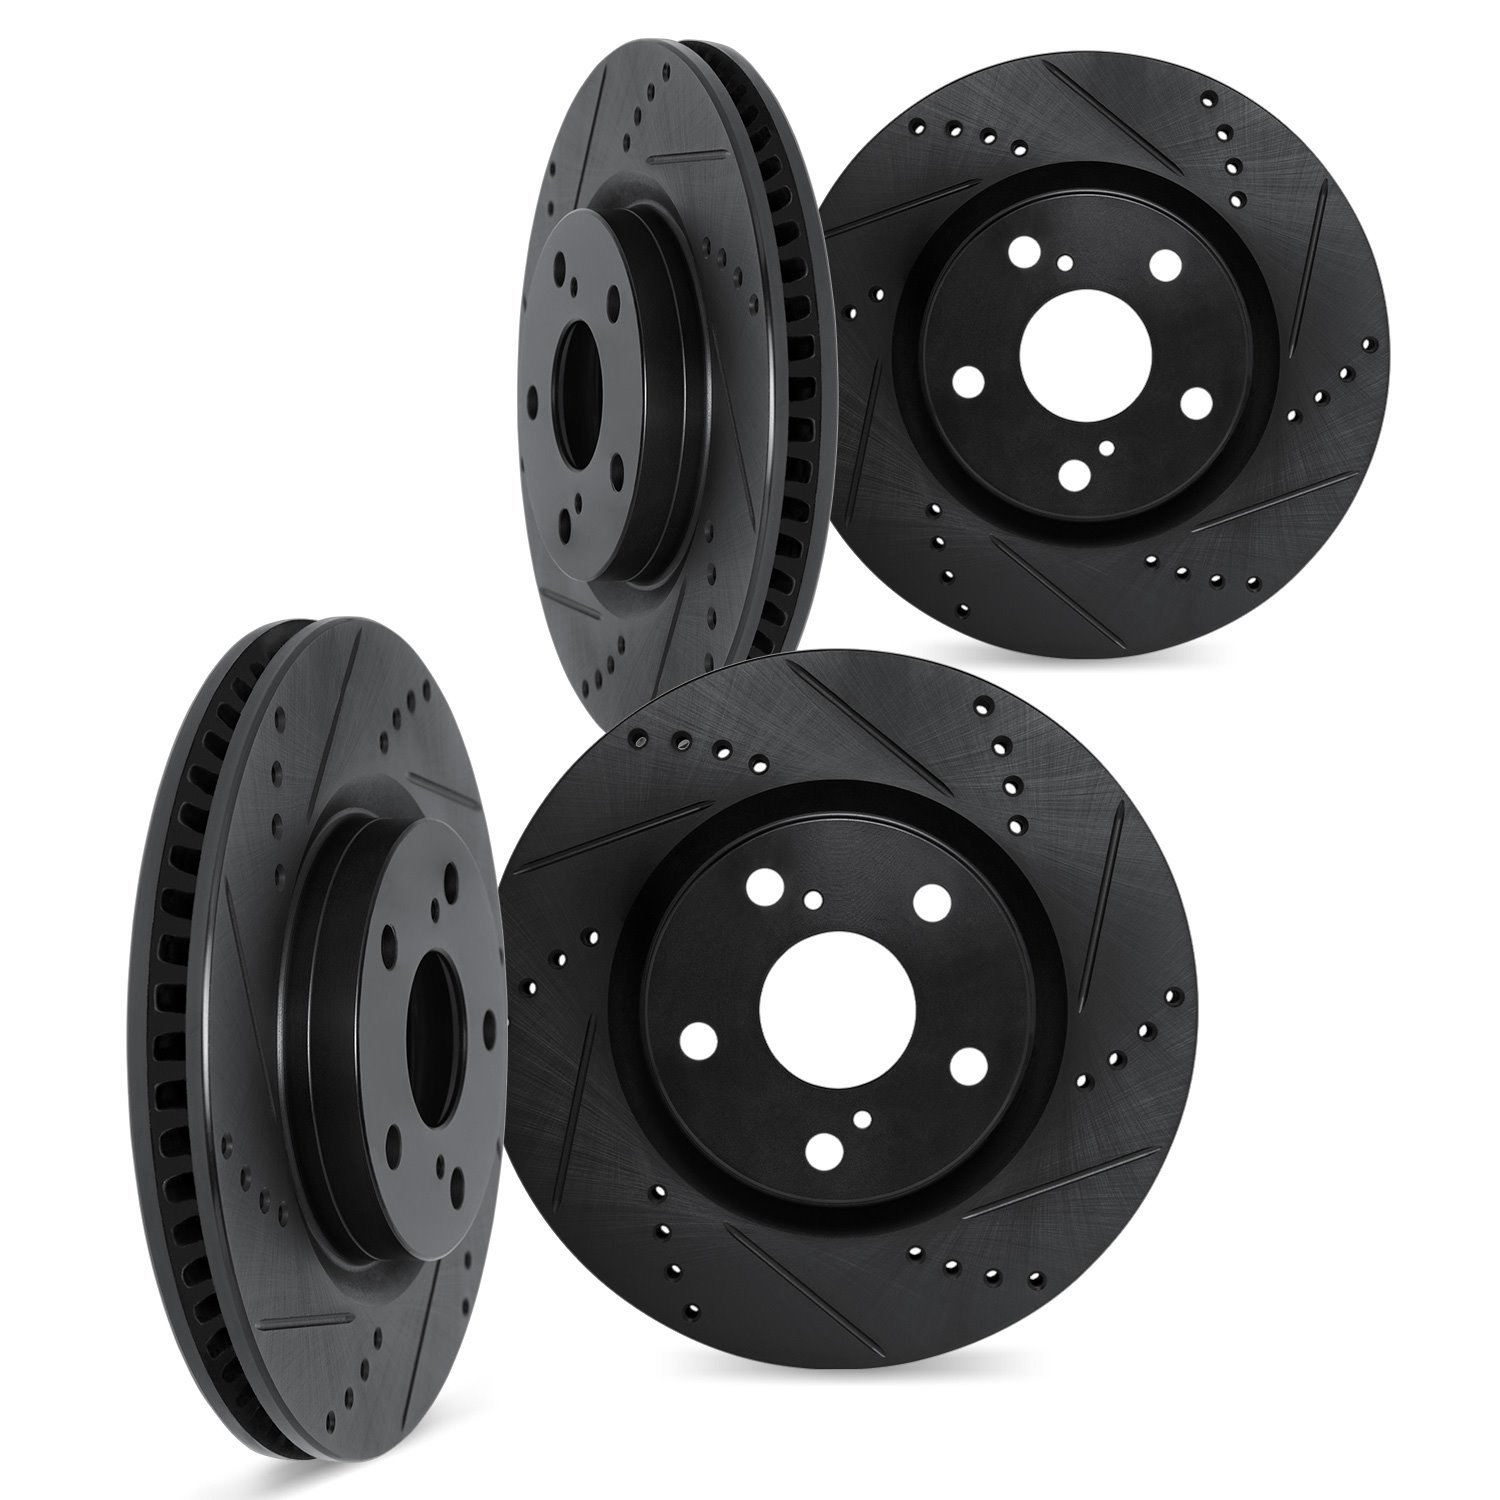 8004-73042 Drilled/Slotted Brake Rotors [Black], 2005-2011 Audi/Volkswagen, Position: Front and Rear